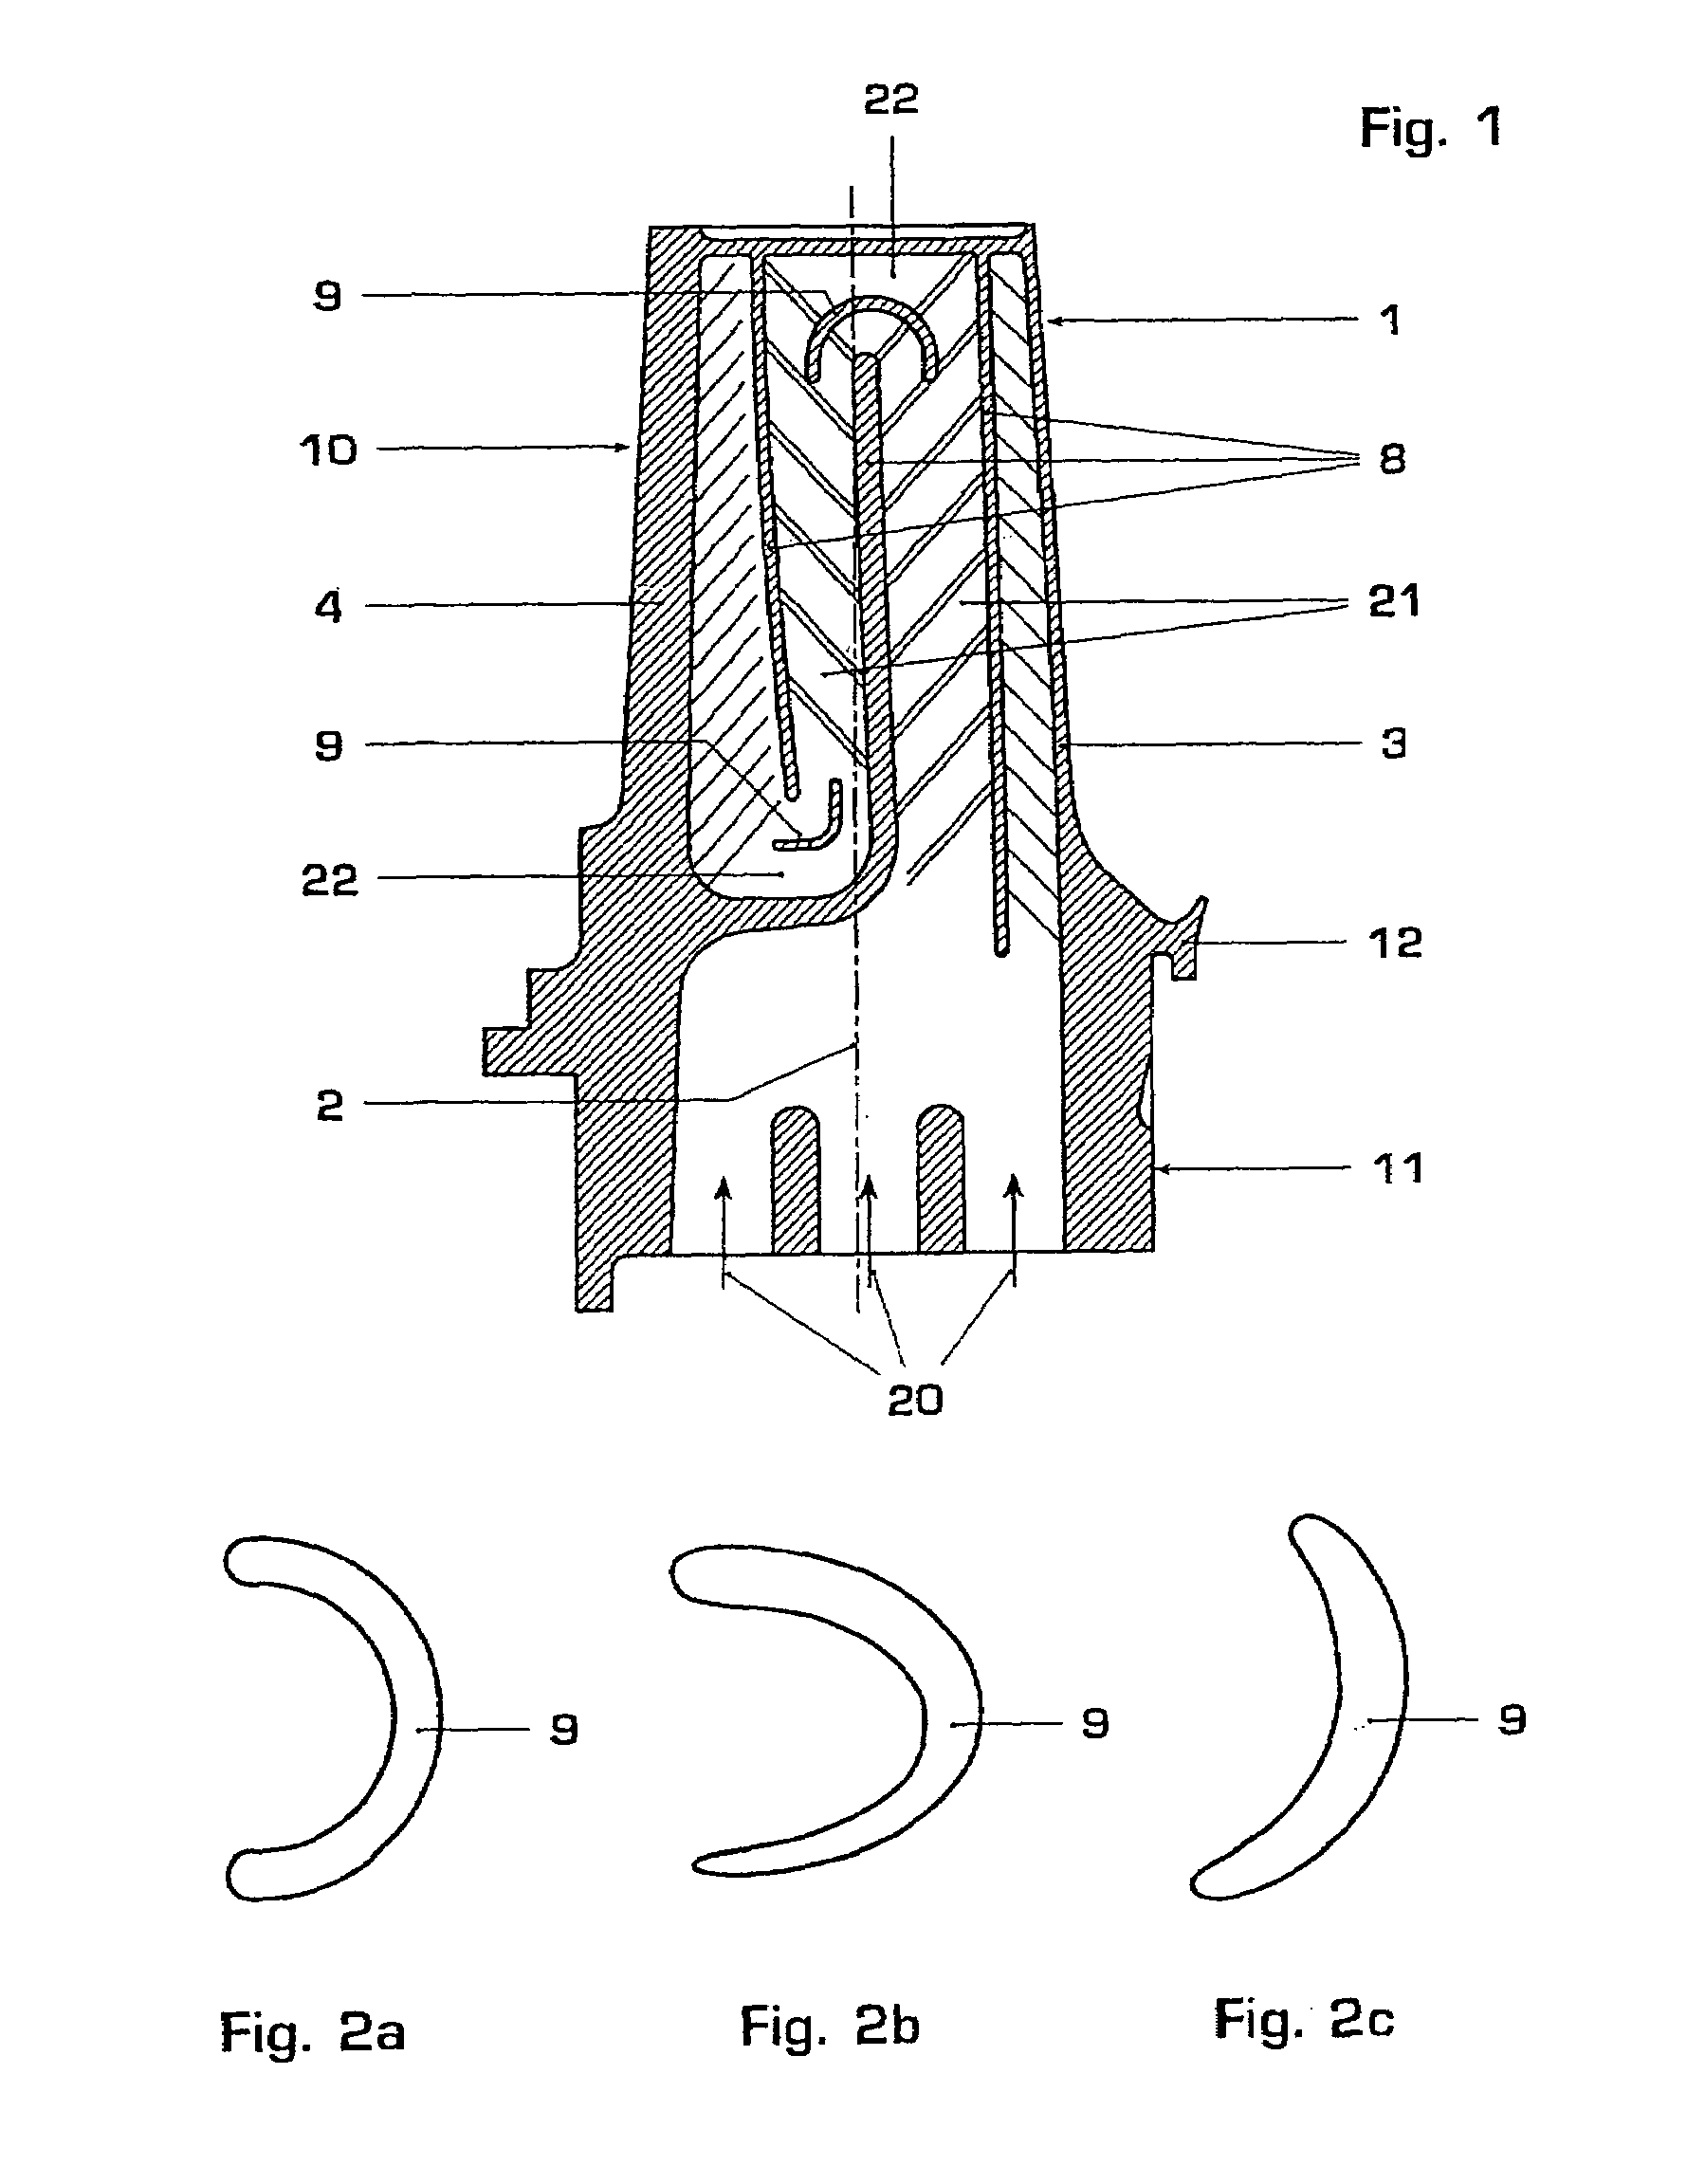 Thermally loaded component